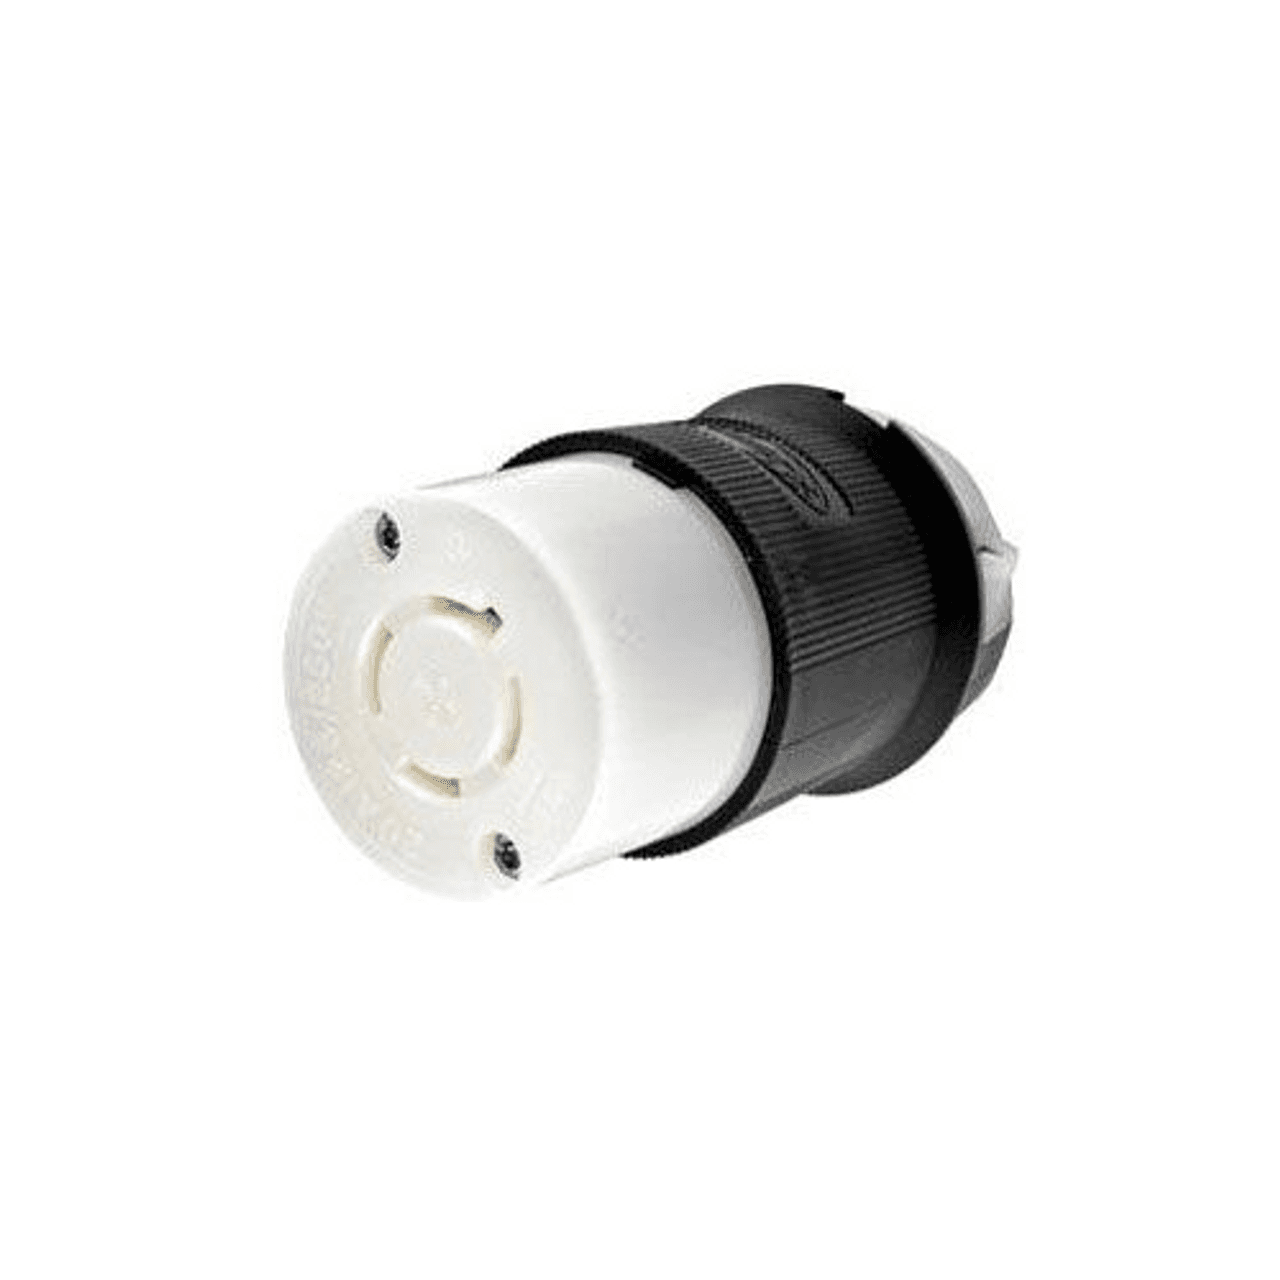 Hubbell HBL2413 Locking Devices, Twist-Lock®, Industrial, Female Insulgrip® Connector Body, 20A 125/250V AC, 3-Pole 4-Wire Grounding, NEMA L14-20R, Screw Terminal, Black and White Nylon.  ; Superior cord grip design protects terminations from excess strain. ; Clear, funn